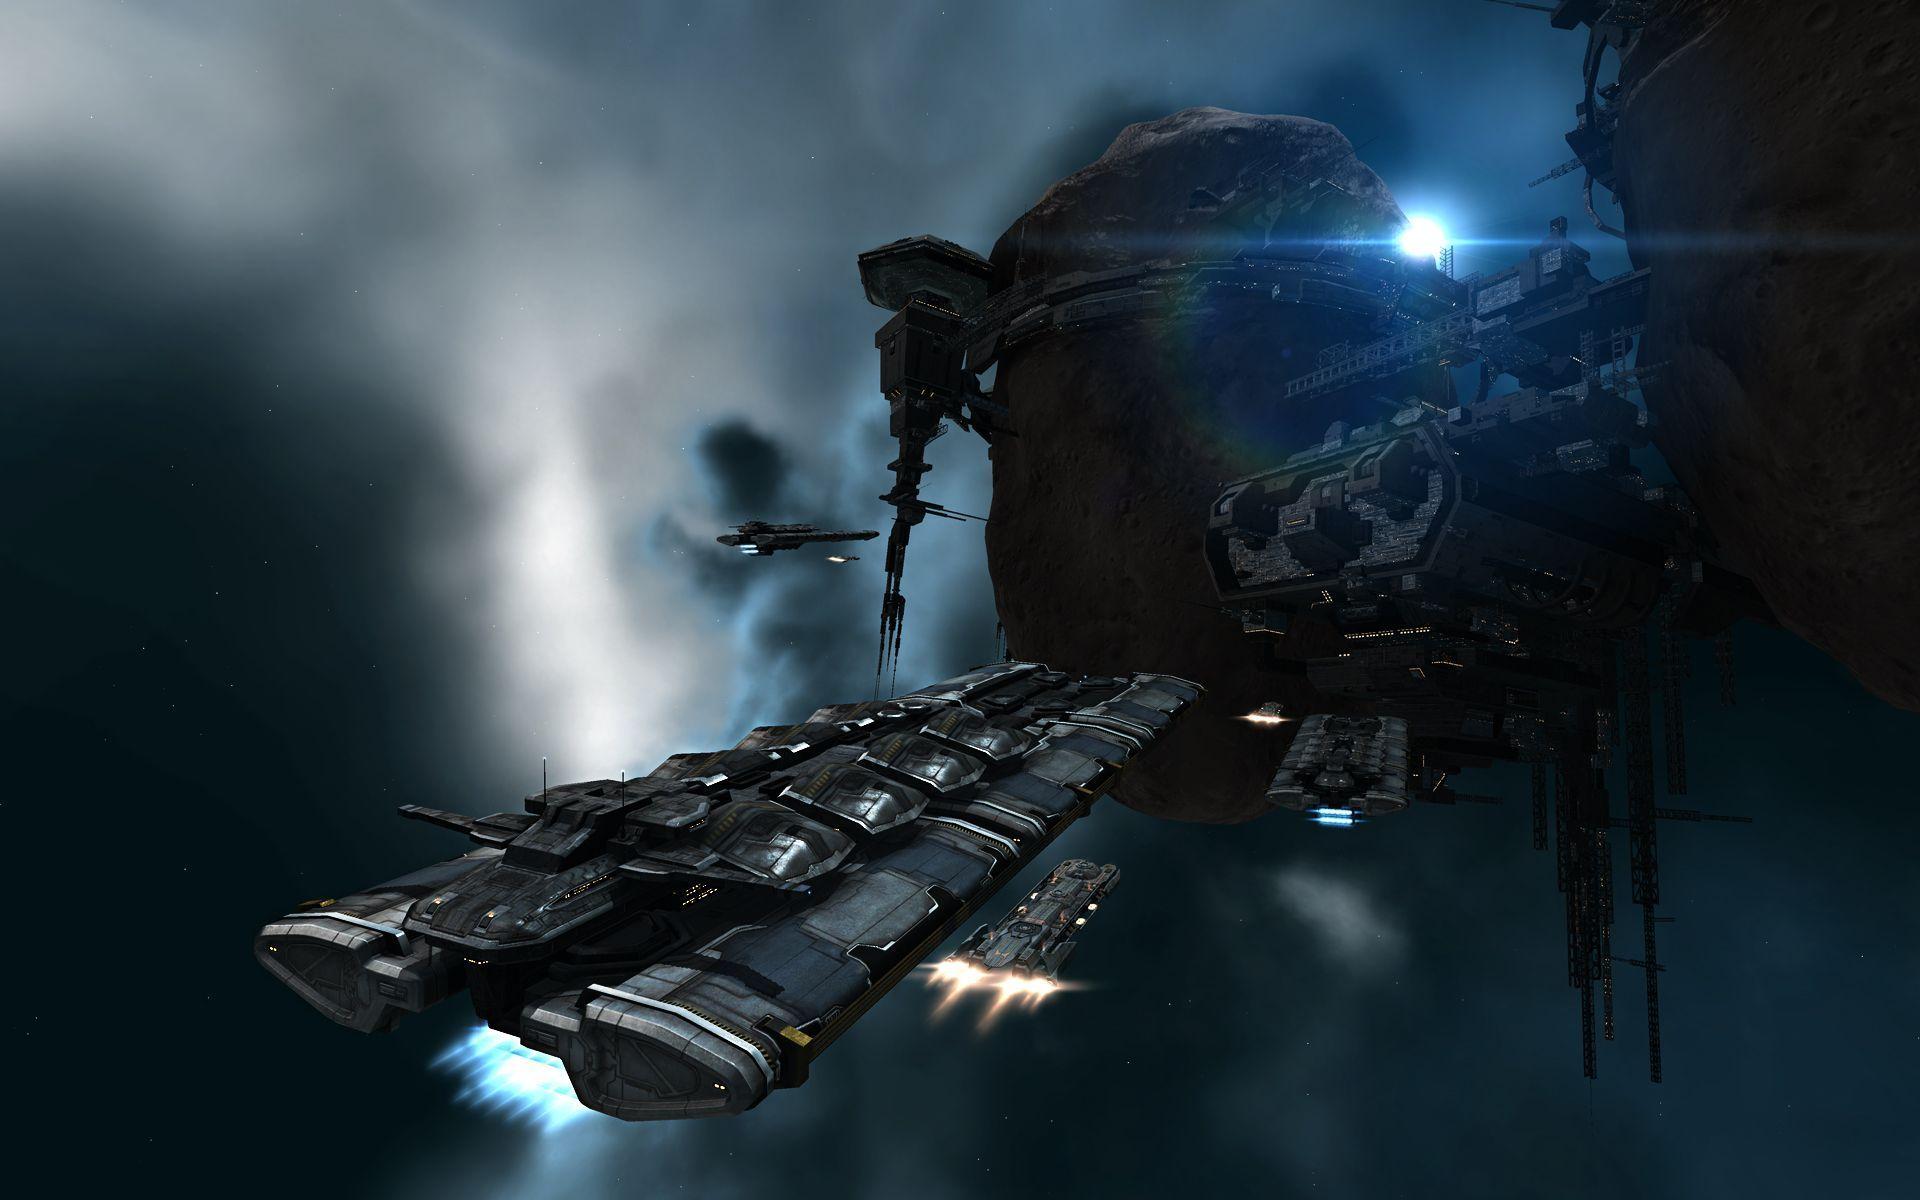 eve online wallpaper 3. Image And Wallpaper